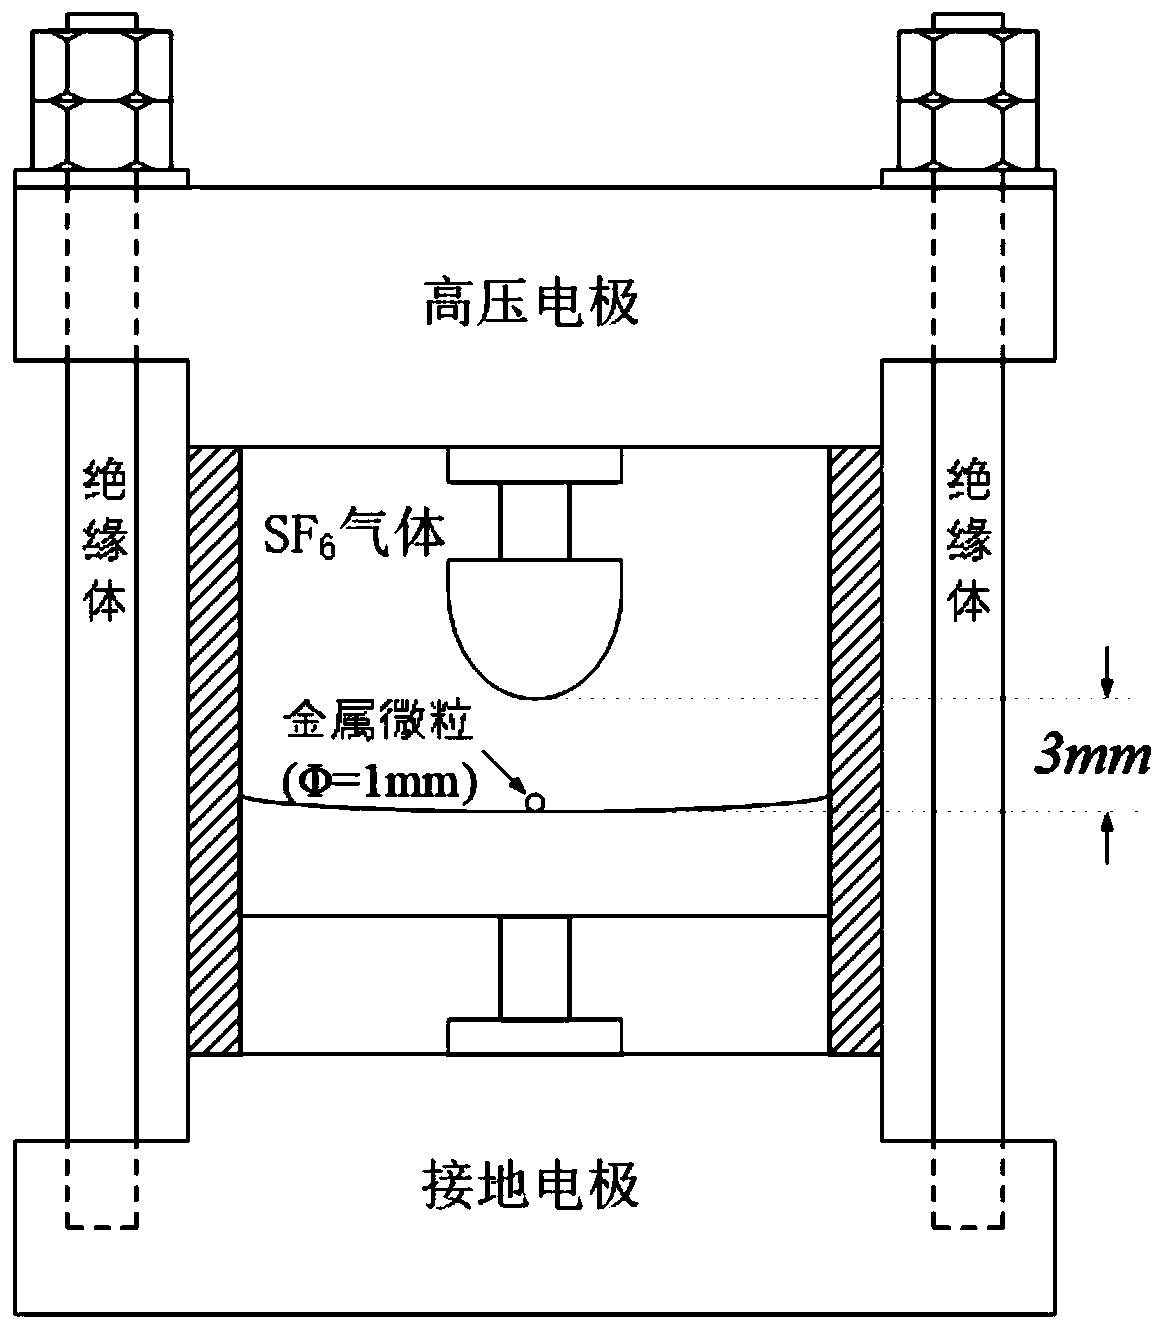 Wavelet denoising method for partial discharge of DC gas-insulated electrical equipment